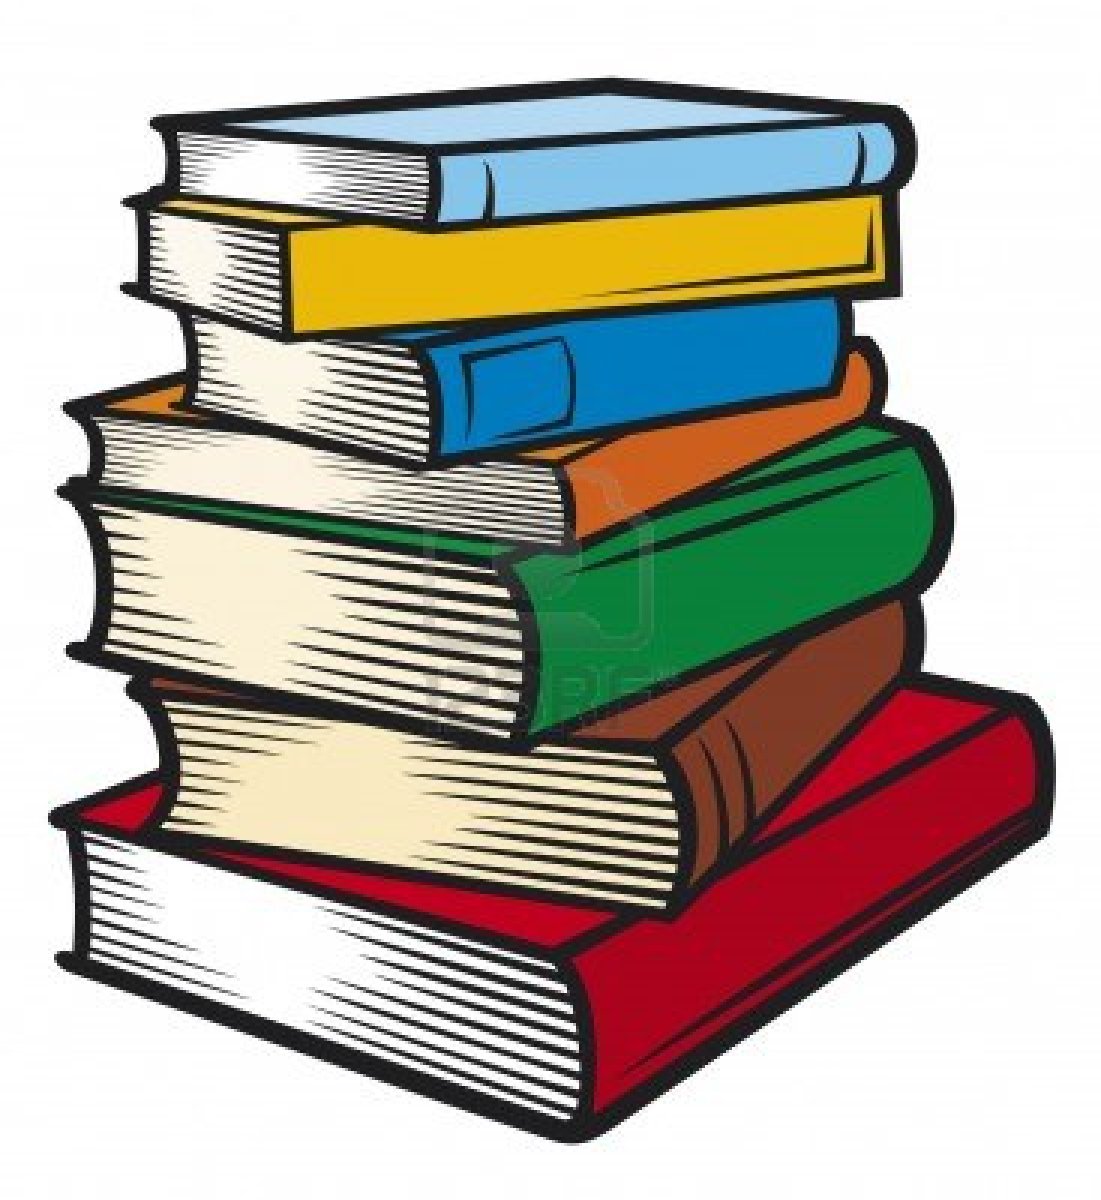 clipart of books - Clipart Of Books